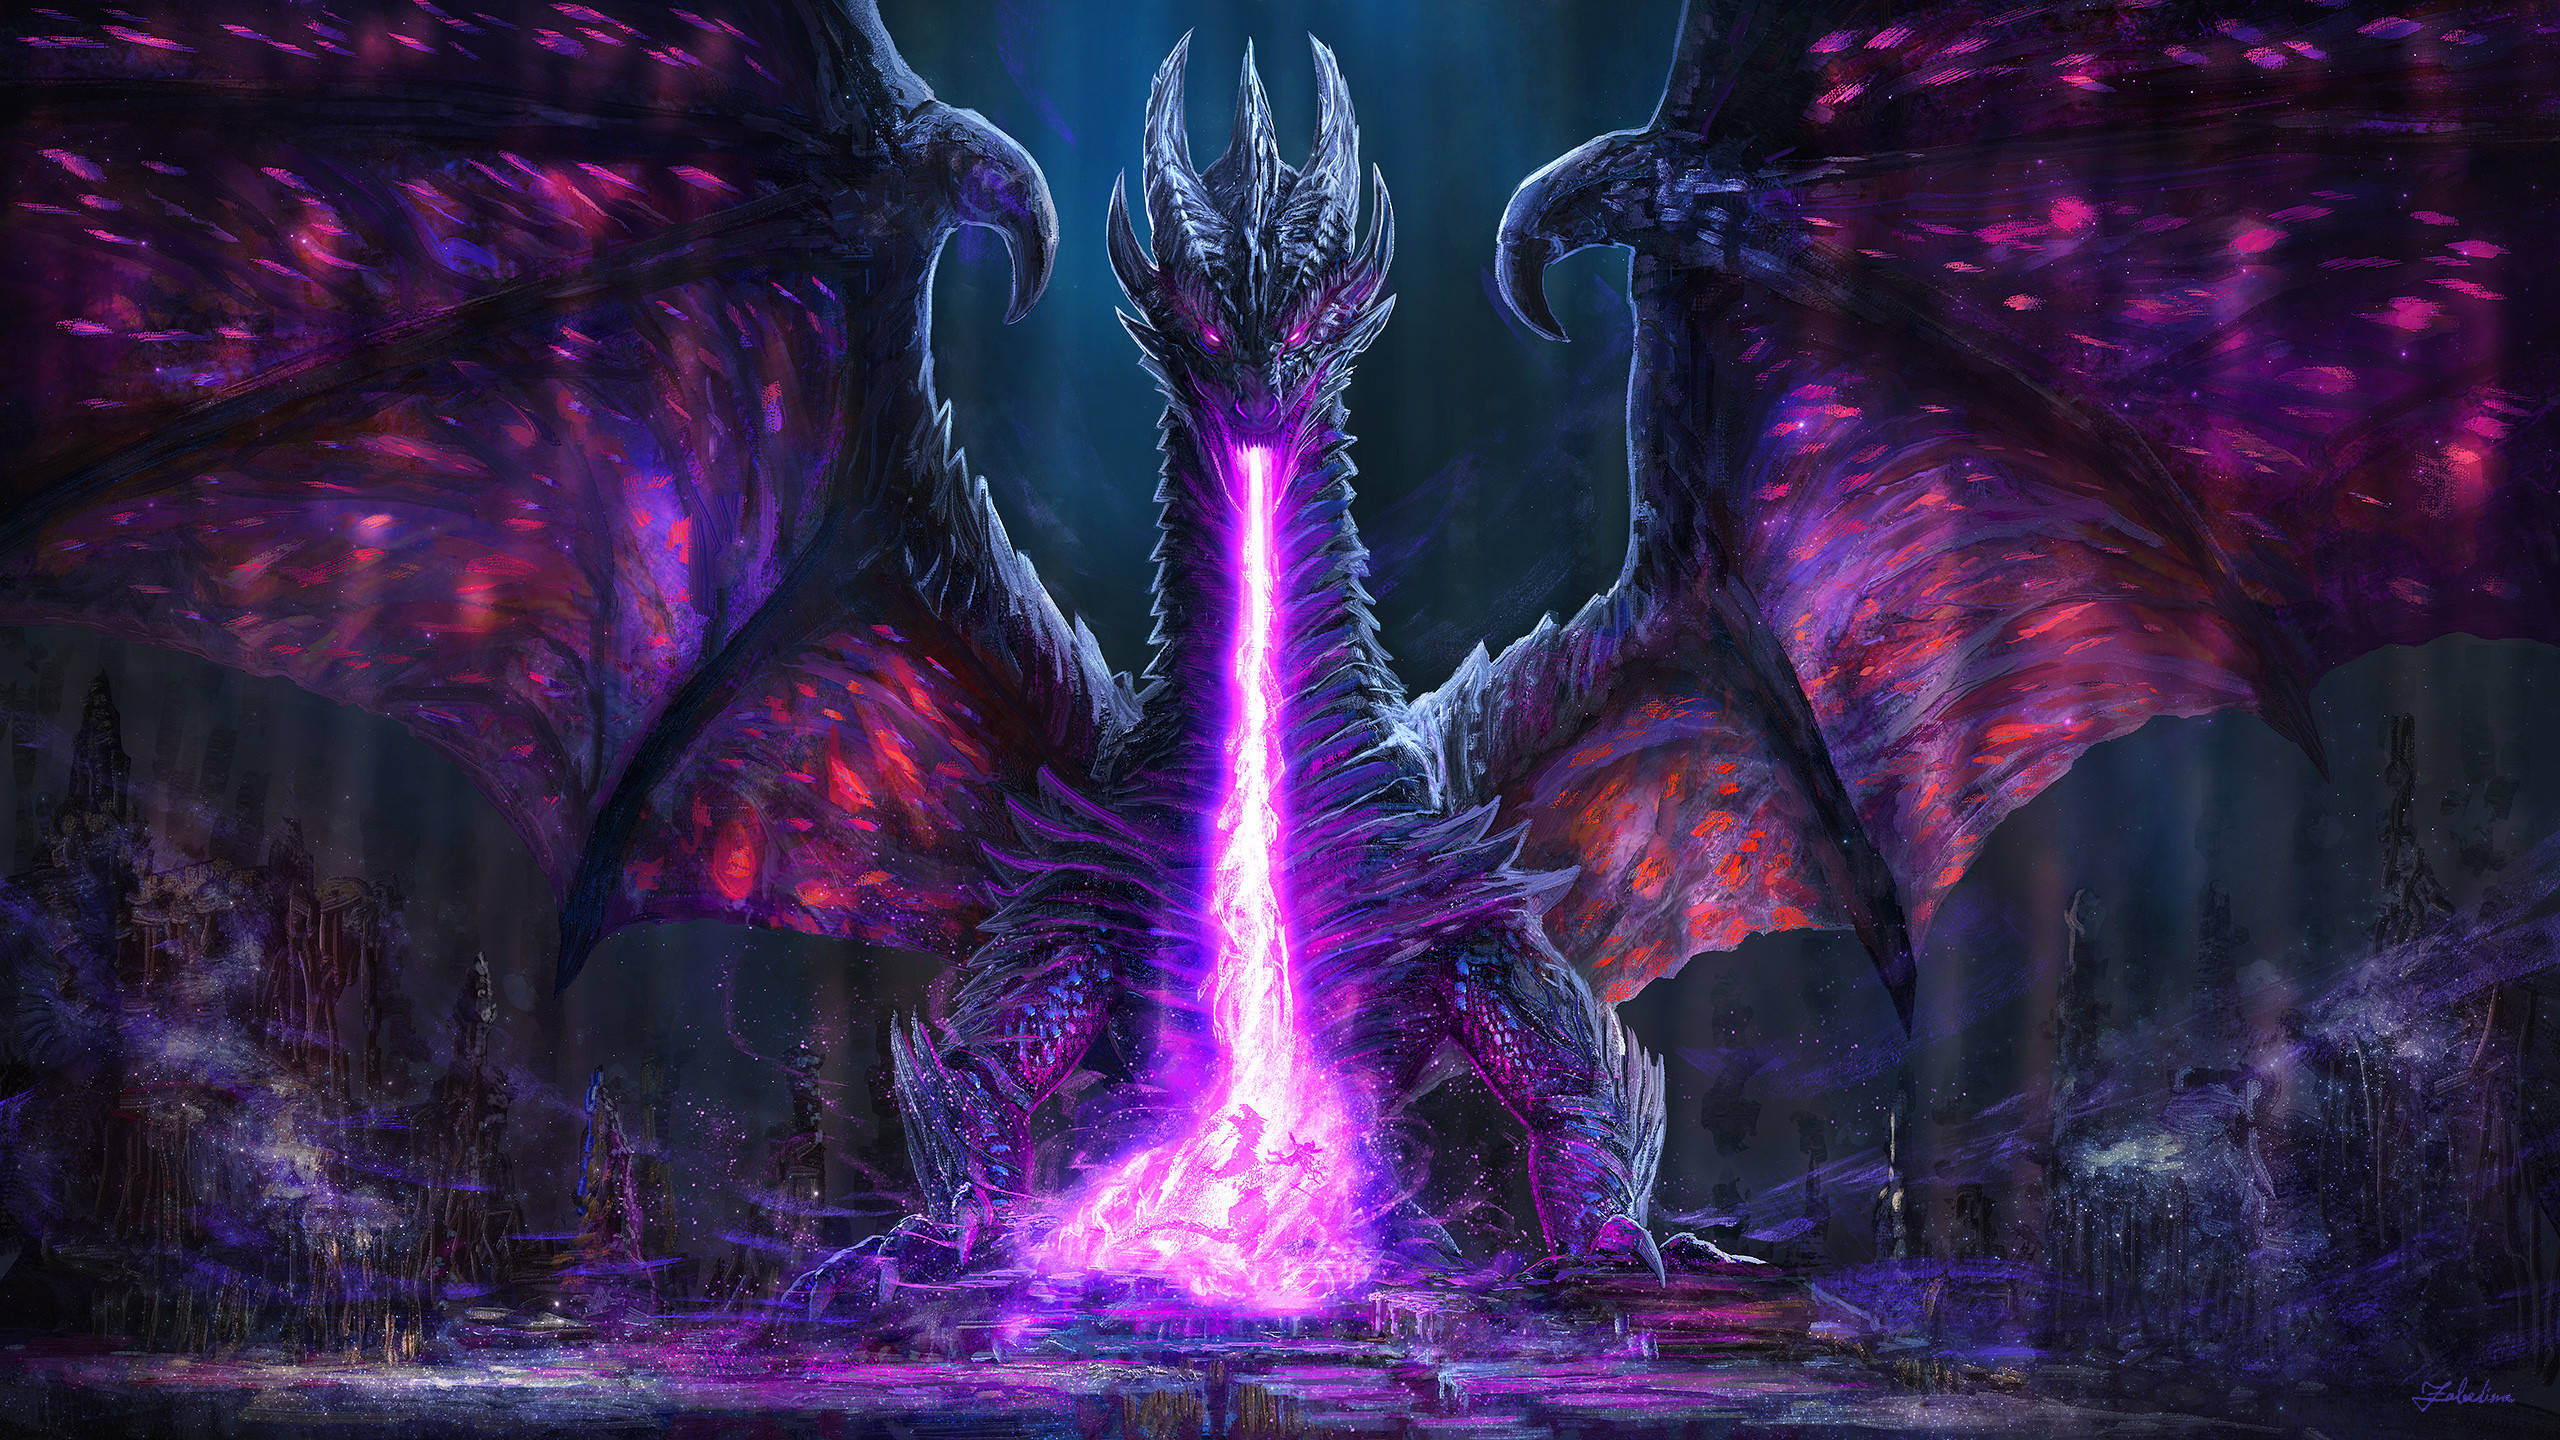 Download Blazing Purple Really Cool Dragons Wallpaper | Wallpapers.com